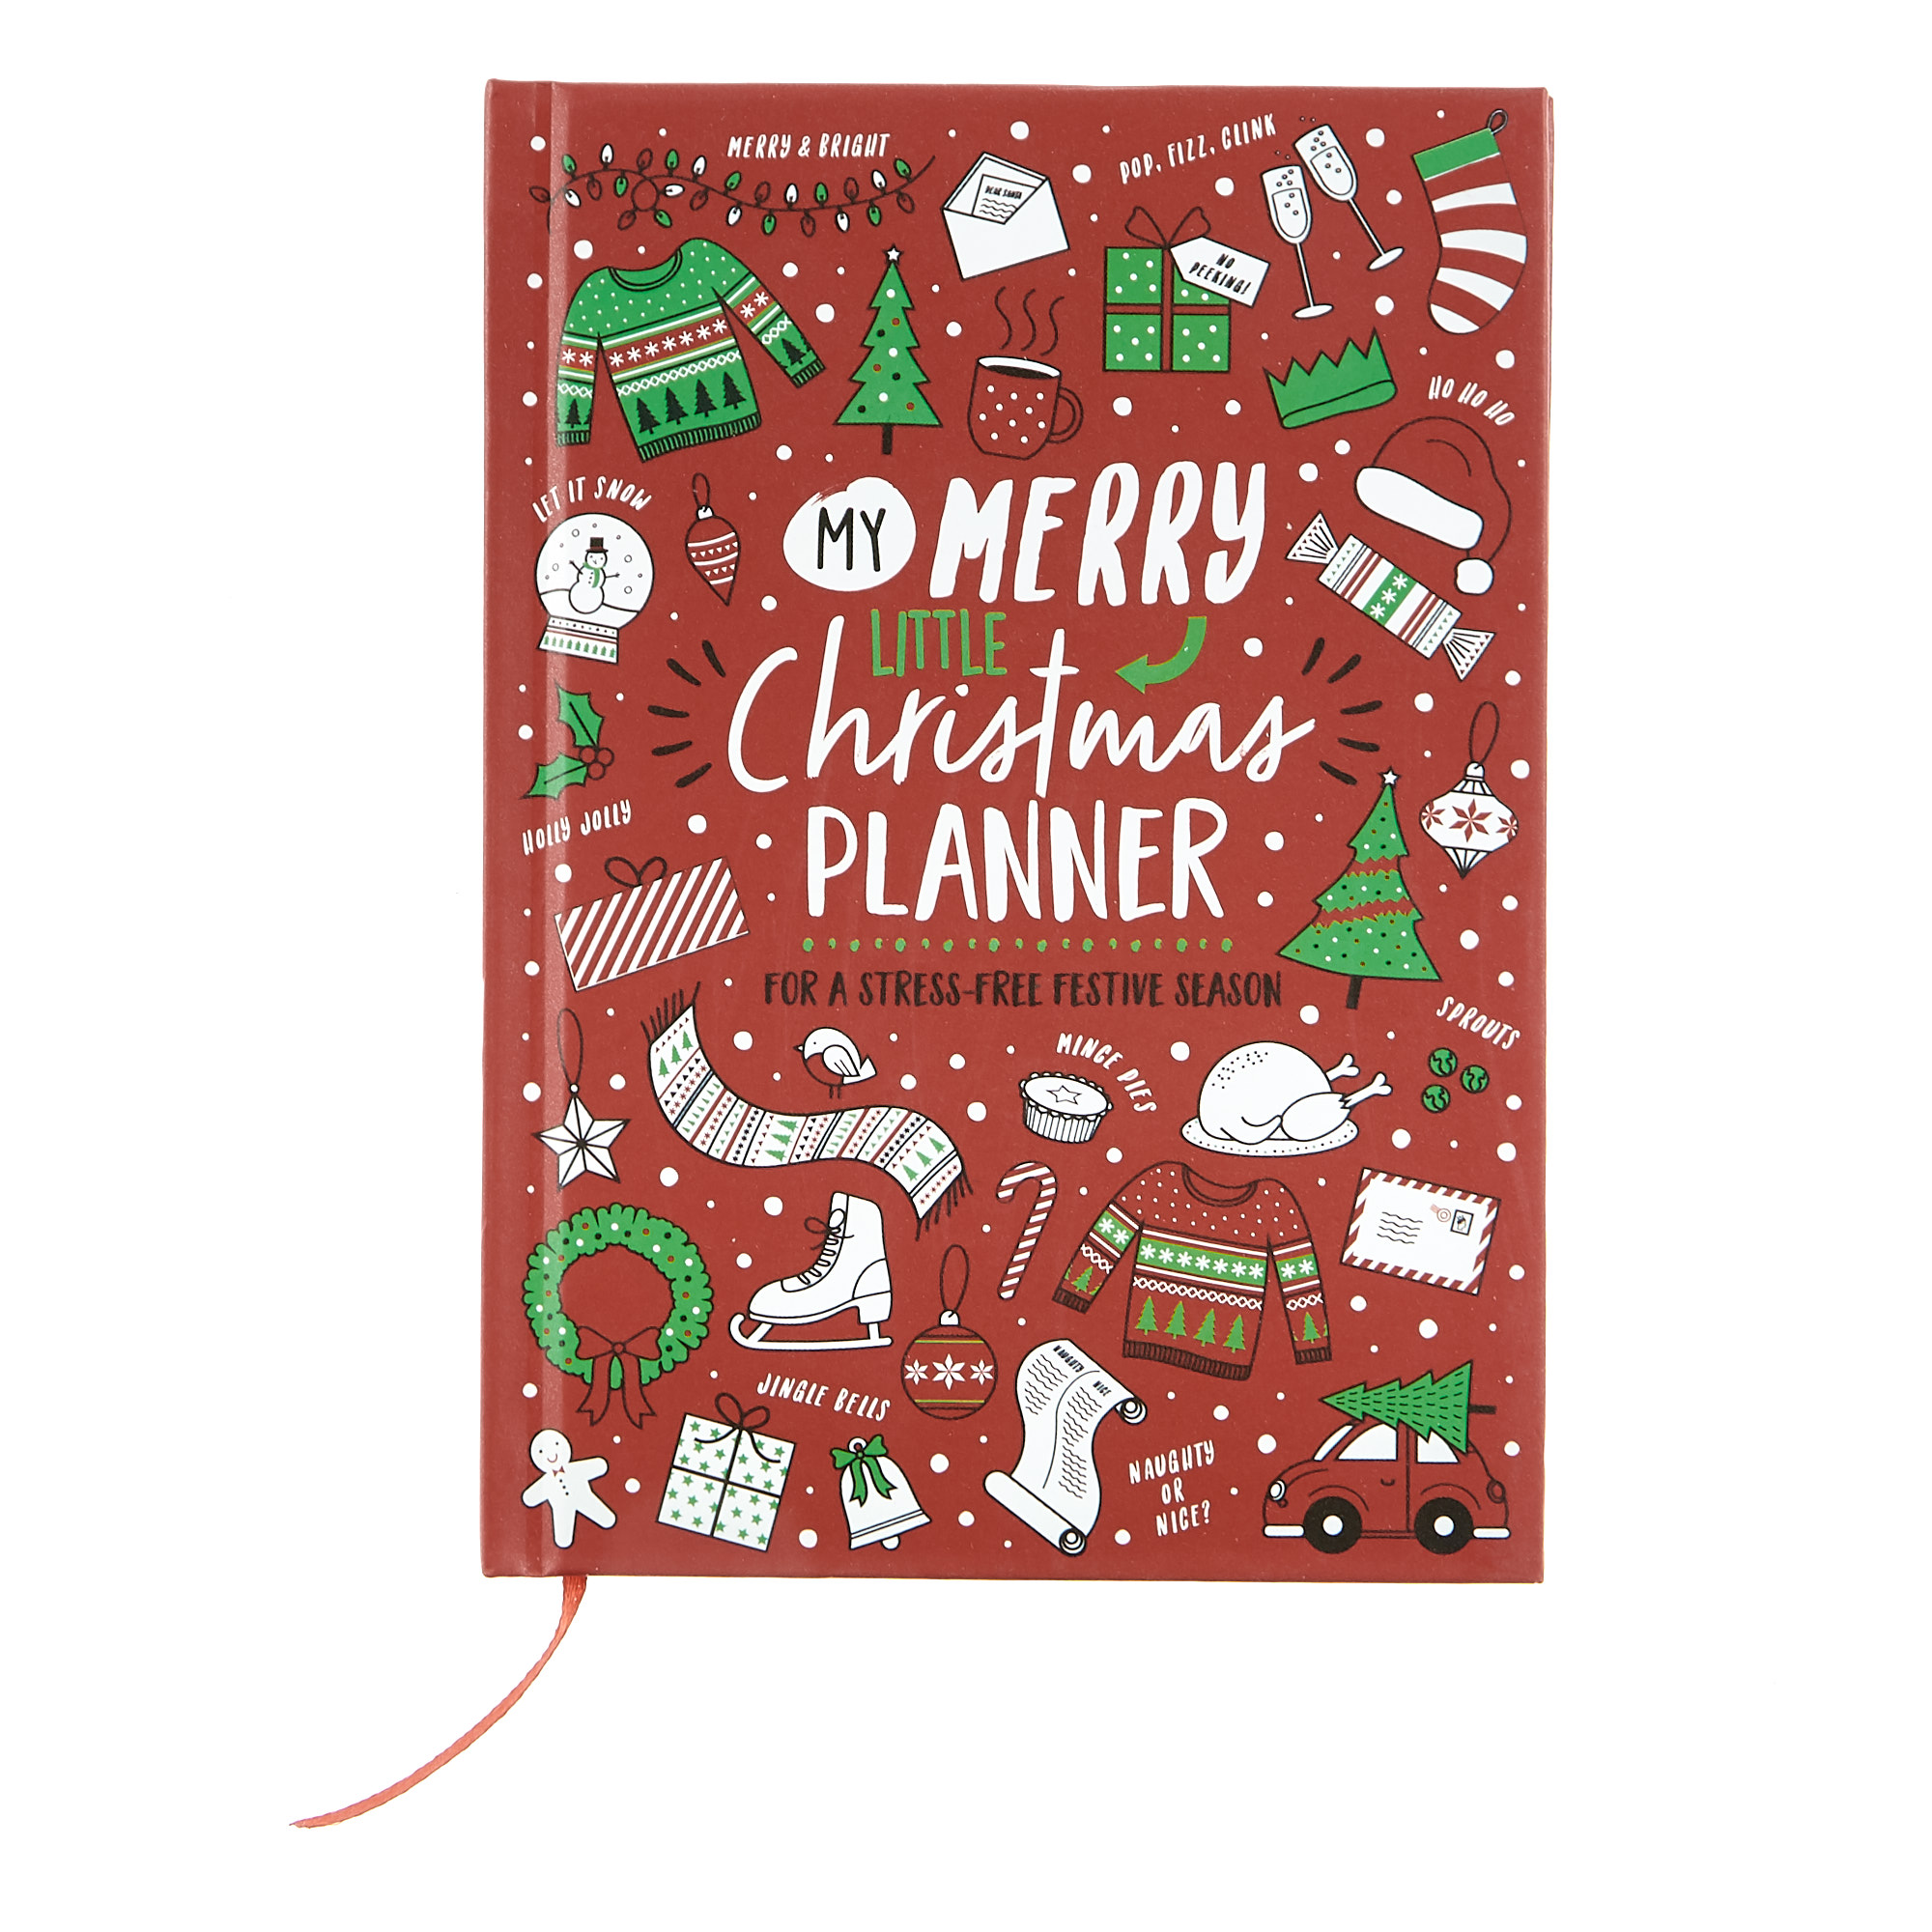 Buy My Merry Little Christmas Planner for GBP 1.50 | Card Factory UK